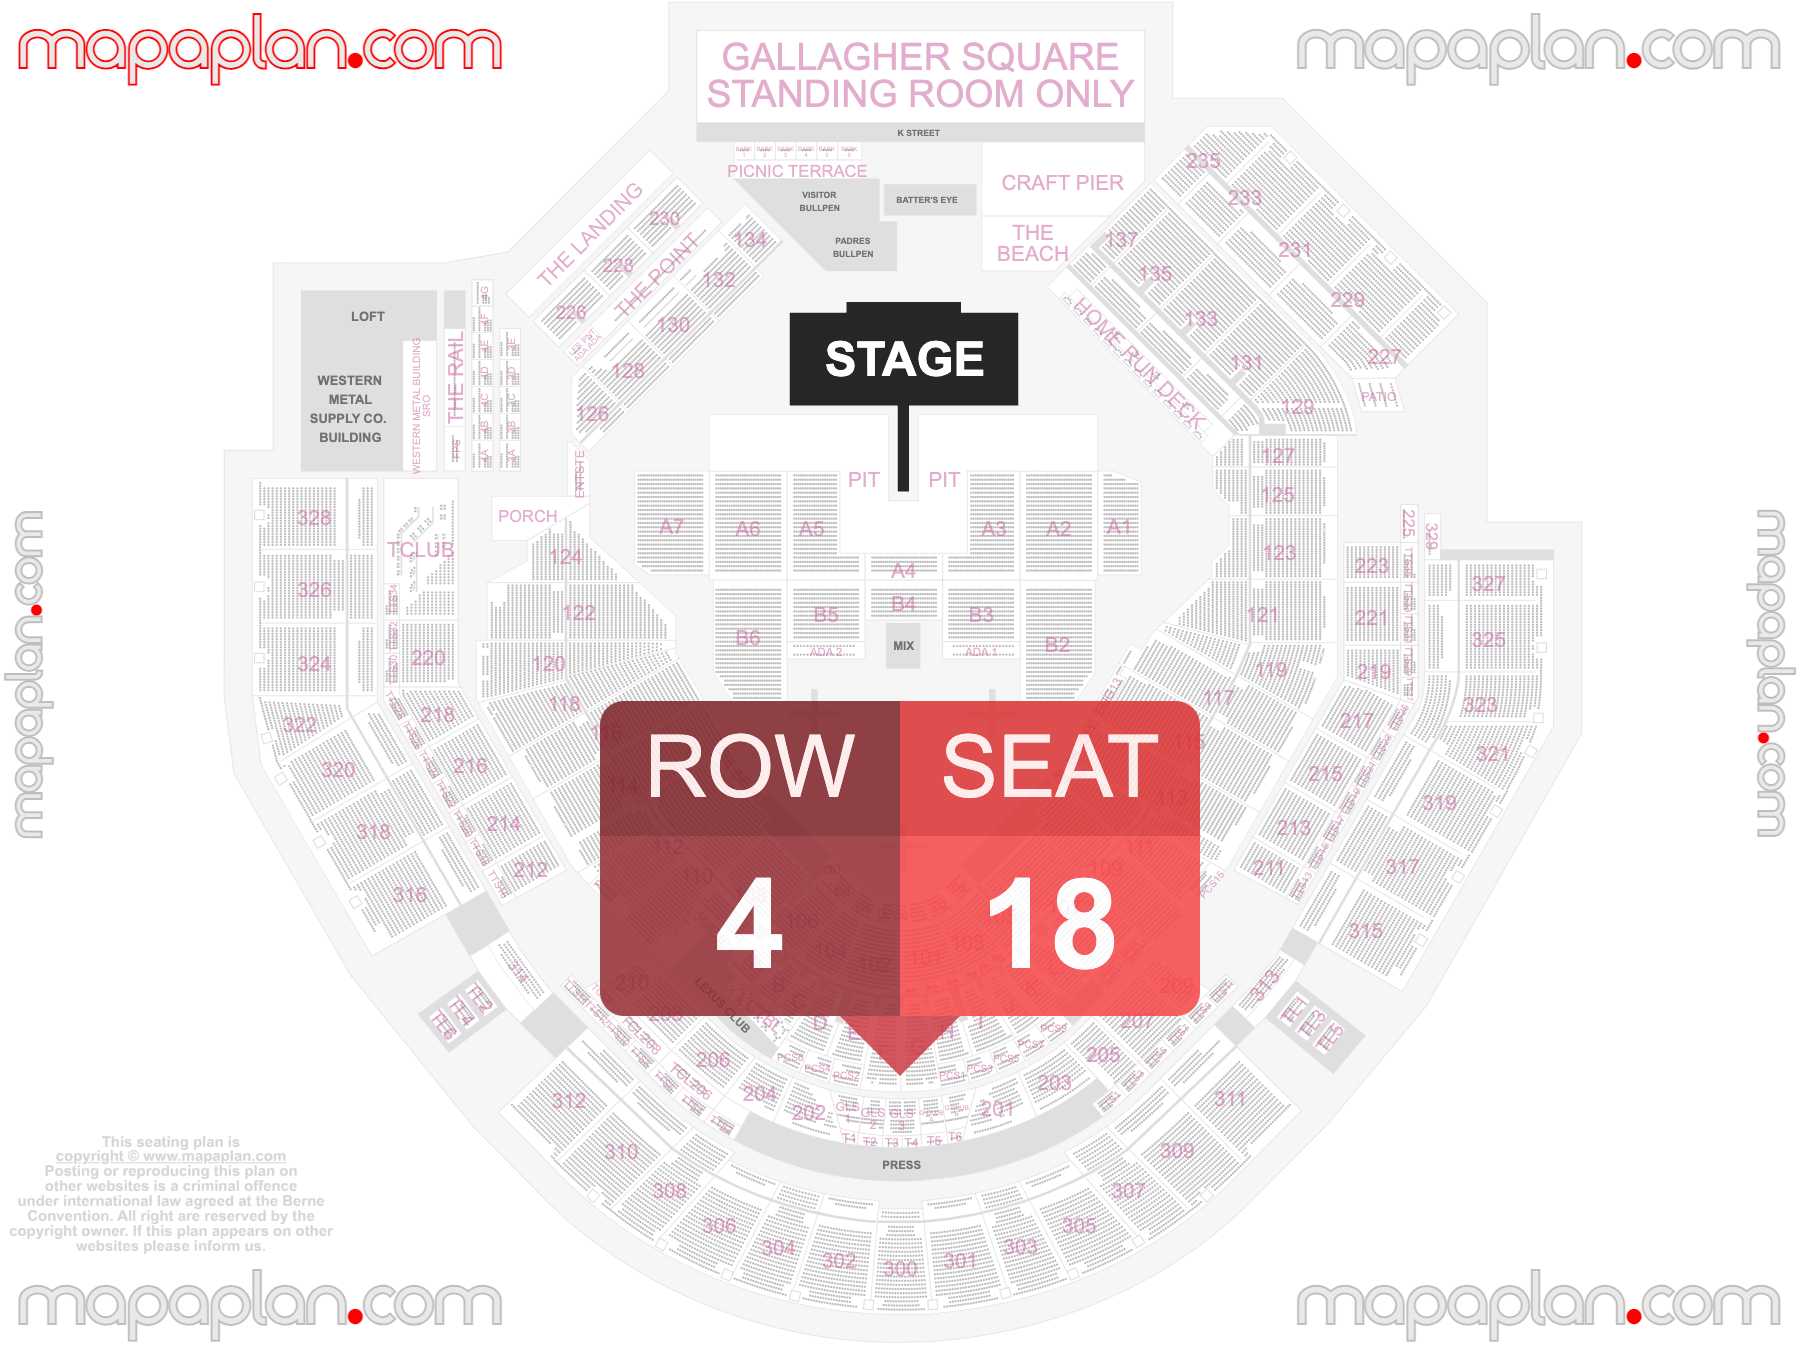 San Diego Petco Park seating chart Concert detailed seat numbers and row numbering chart with interactive map plan layout